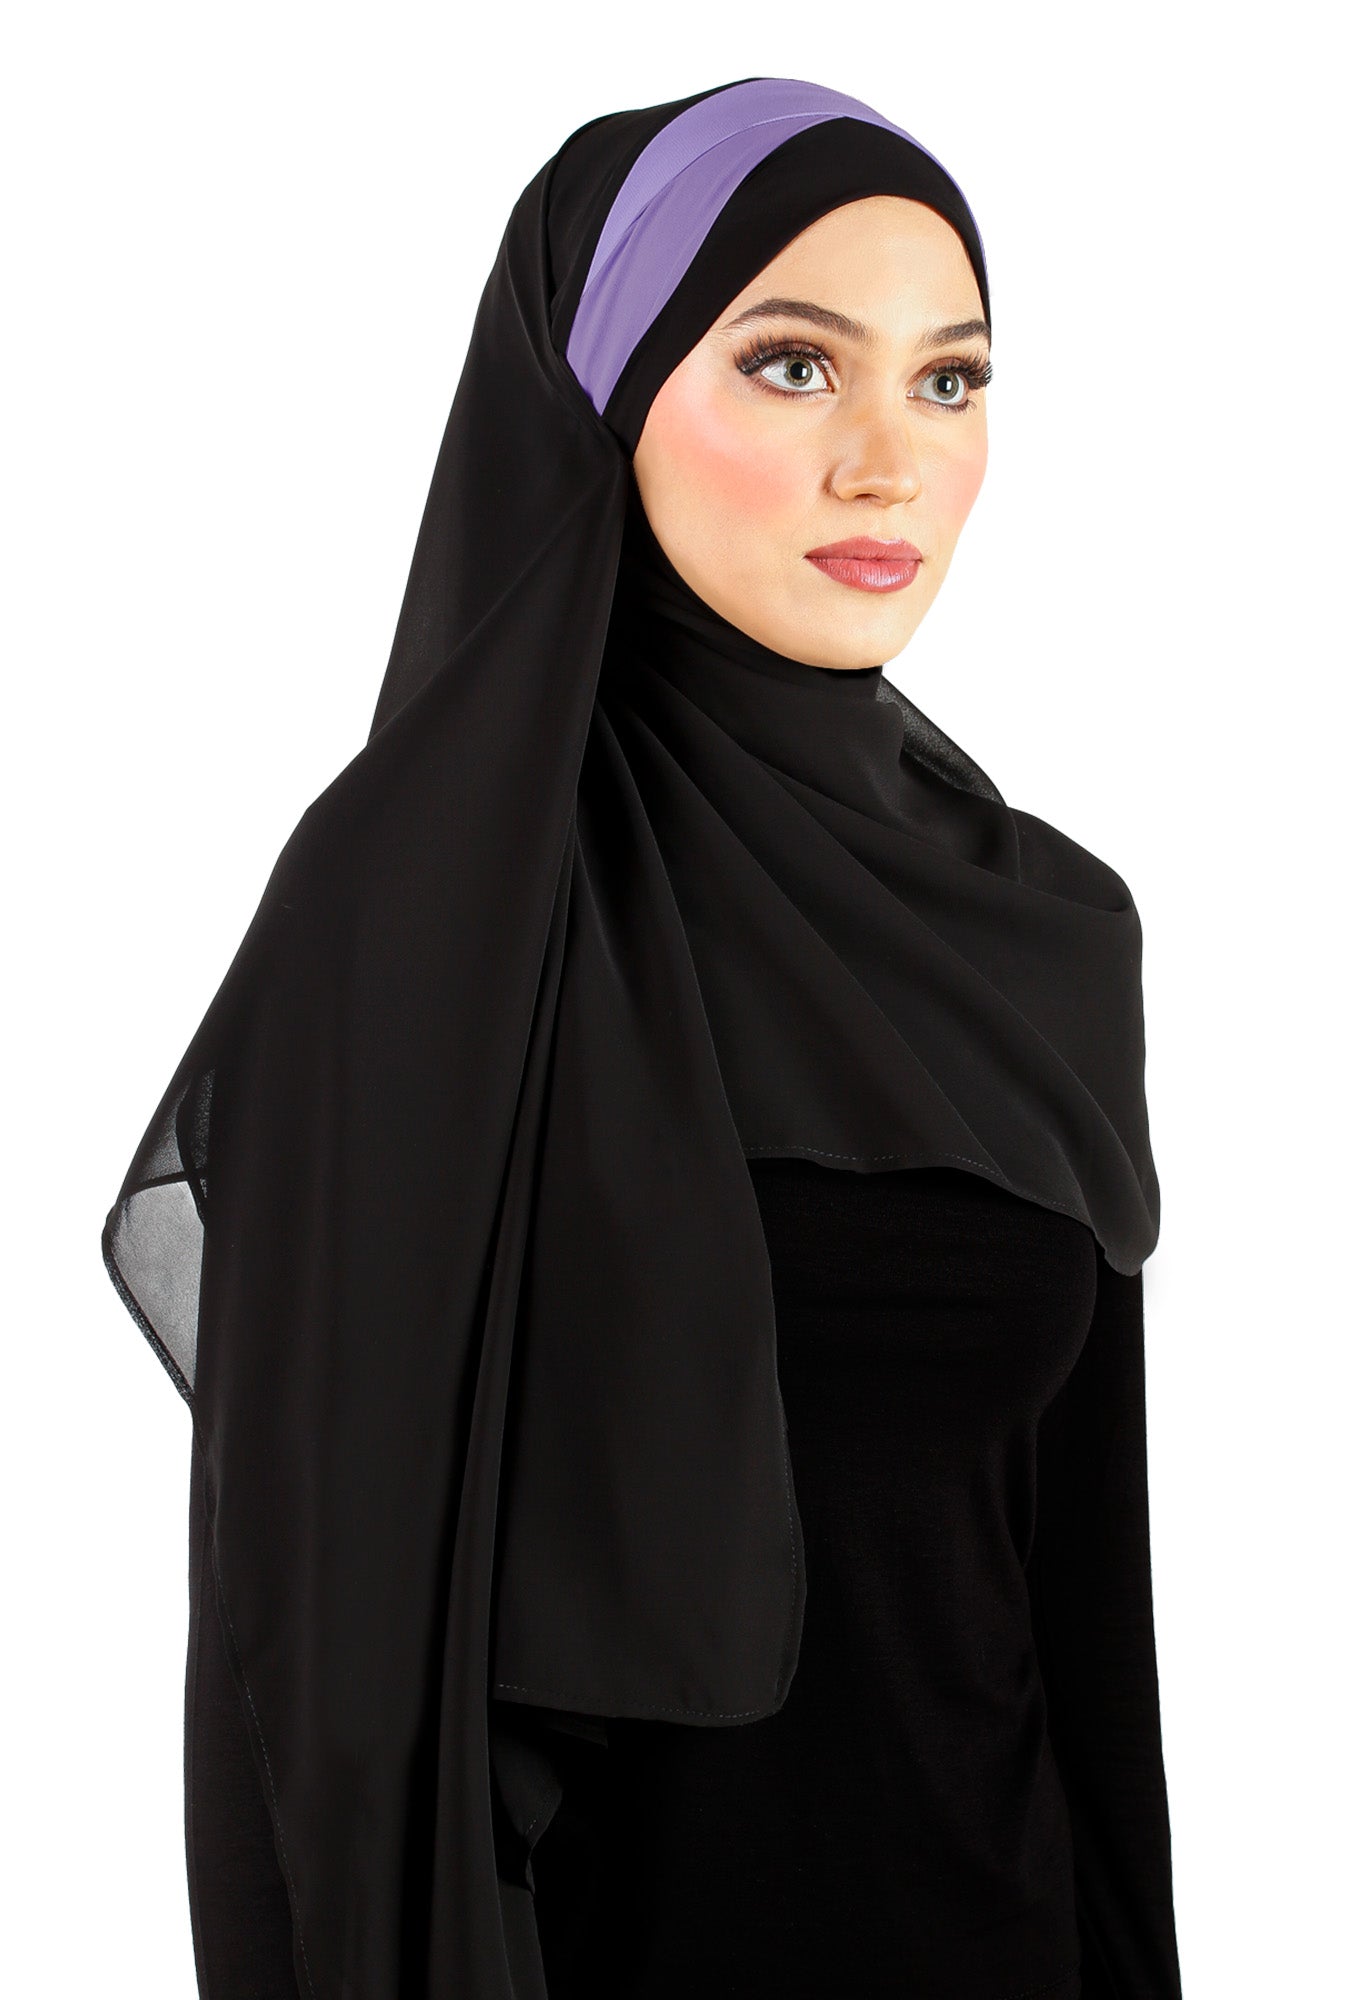 High quality Korean chiffon headscarf in black wth a lilac stripe accent on the forehead caplet has 2 sashes that tie back to secure the hijab